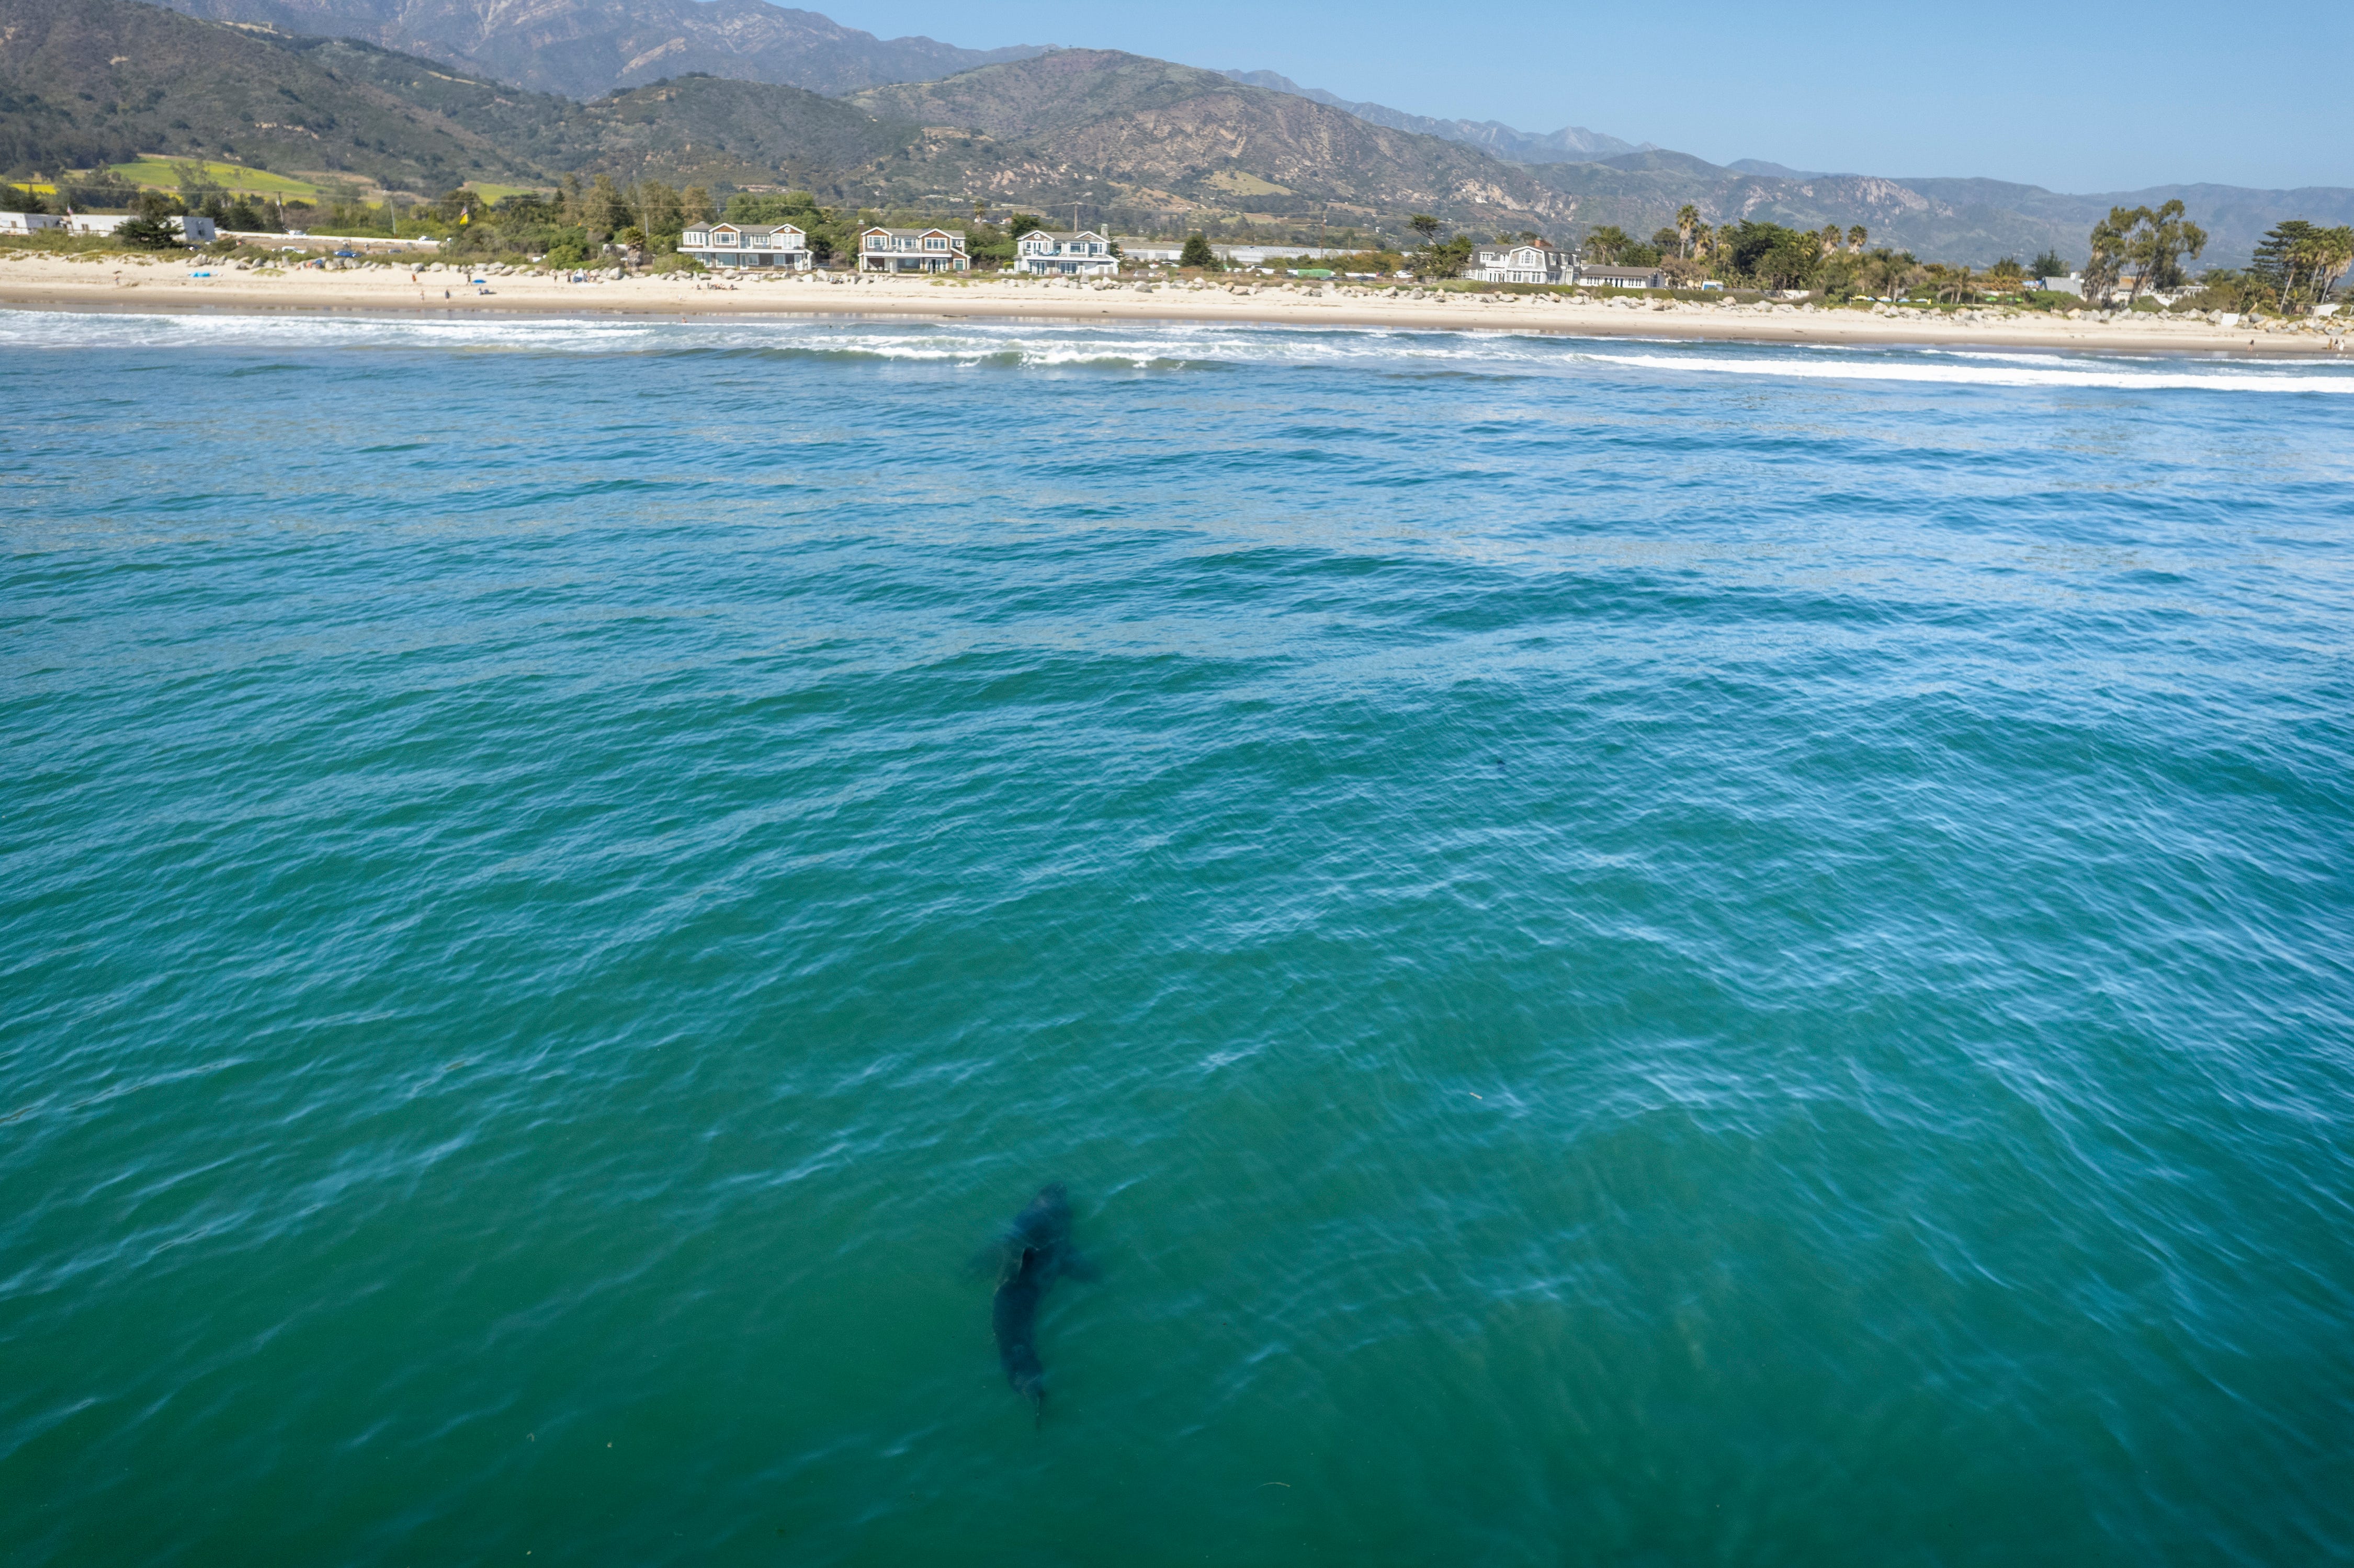 A white shark swims along the coast near Carpinteria, Calif., in May 2022. A Shark Lab team from California State University, Long Beach, is researching so-called nurseries where juvenile sharks hang out.